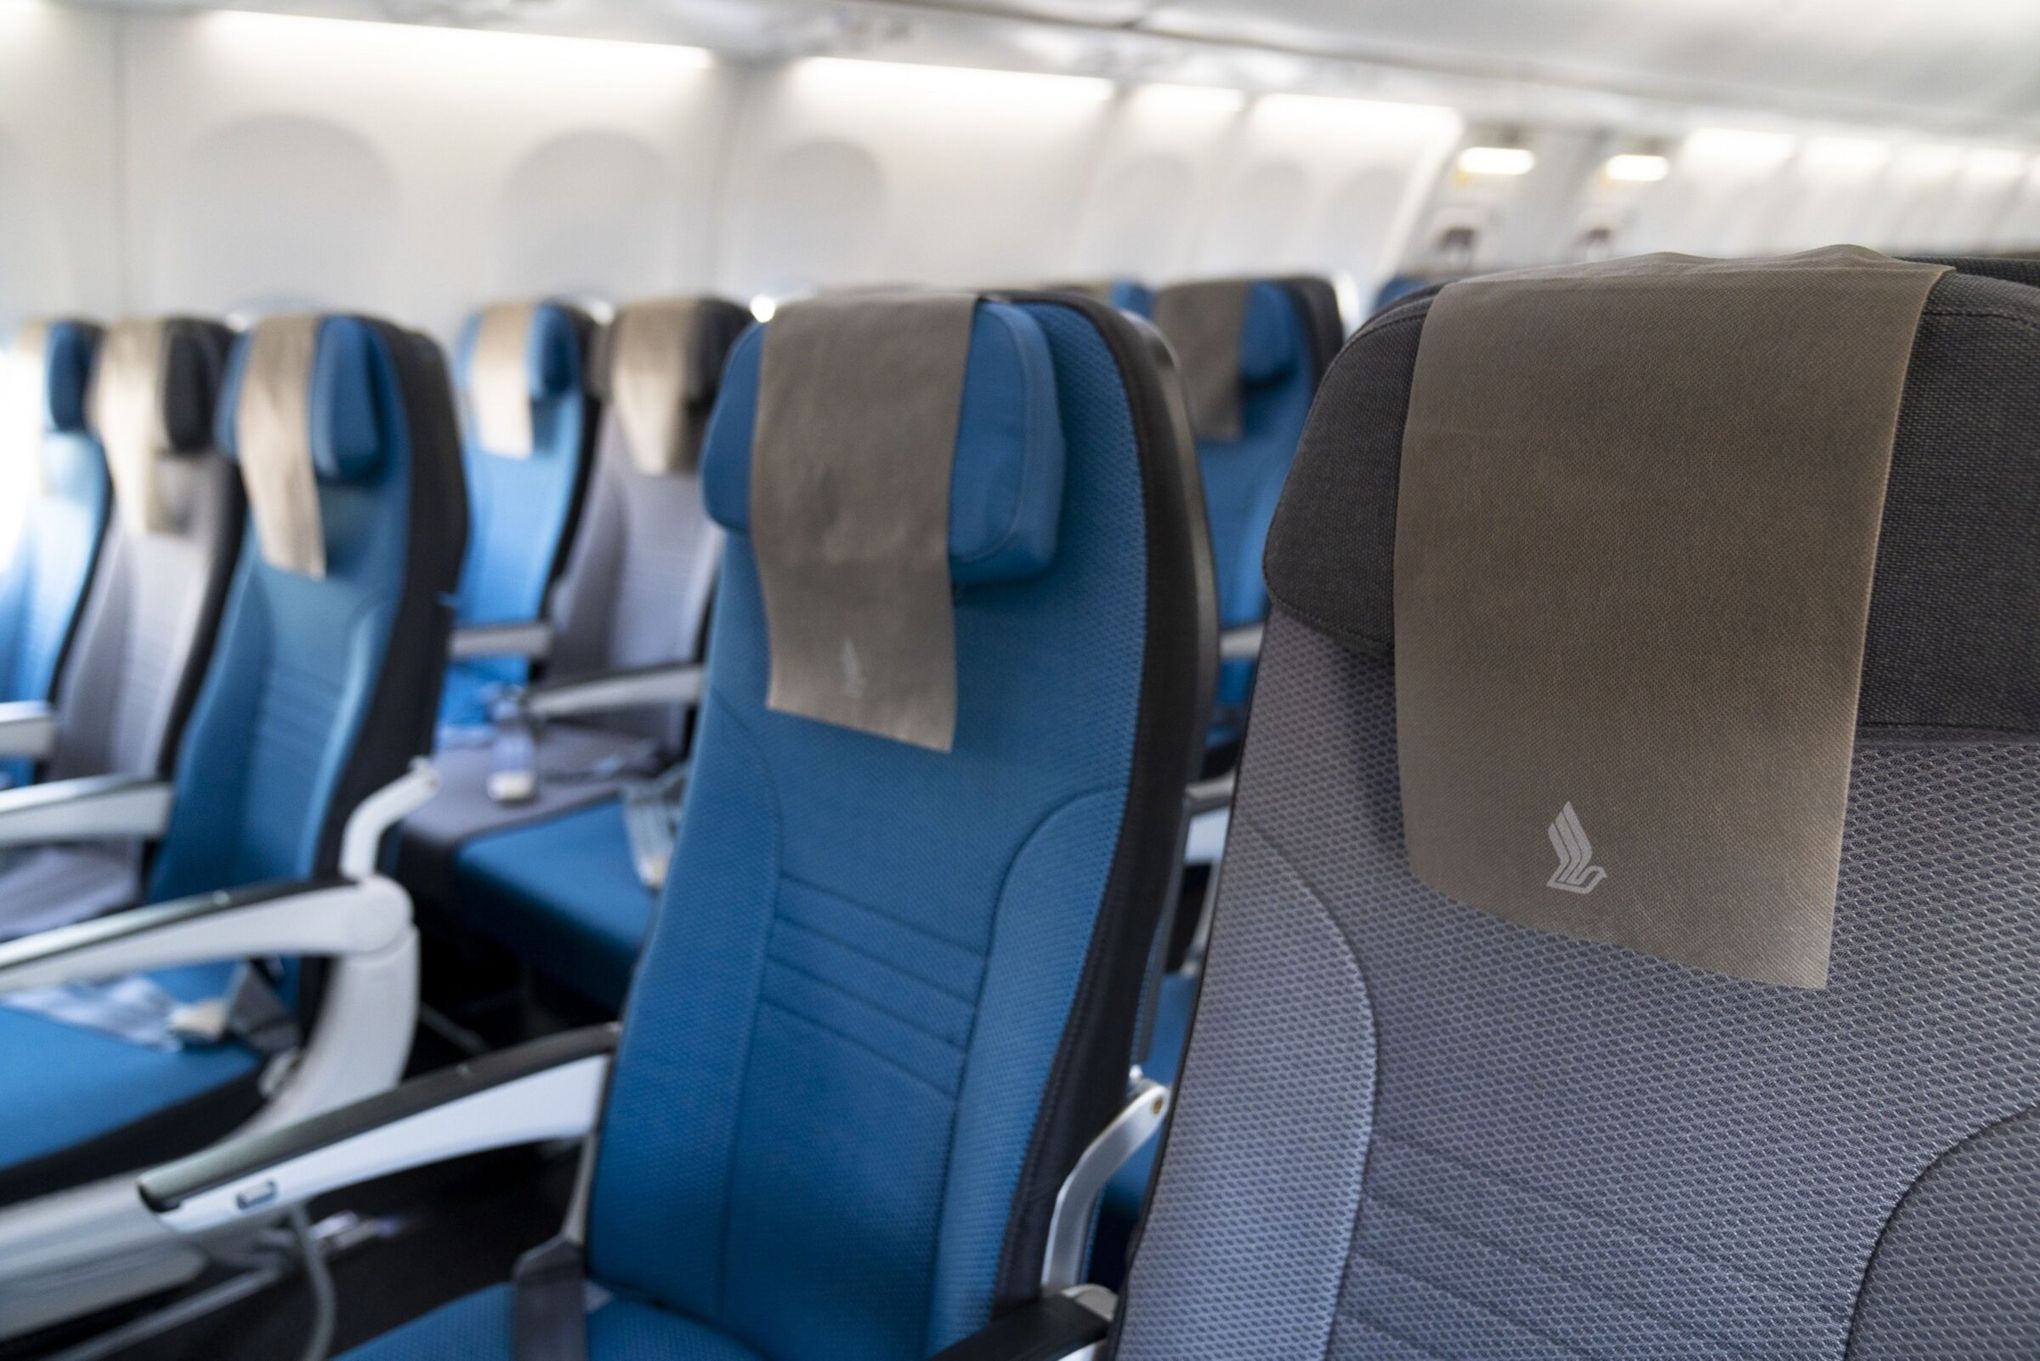 Is it OK to recline your airplane seat? Some travel experts say no